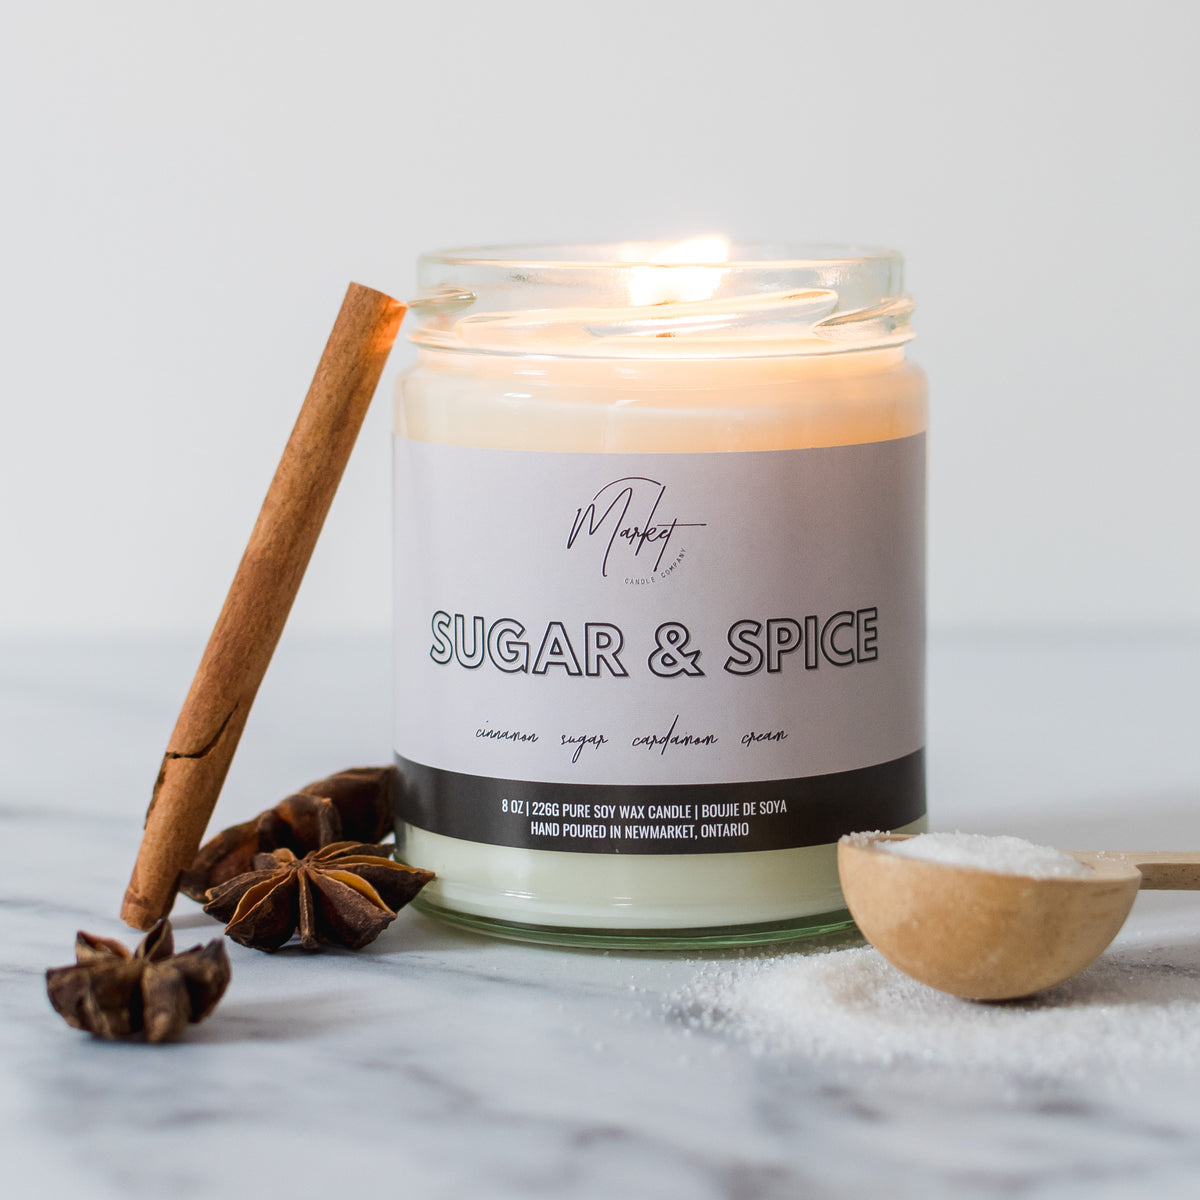 It&#39;s everything nice! Spice, smooth and some sweetness to follow. The perfect scent for a quiet evening in.